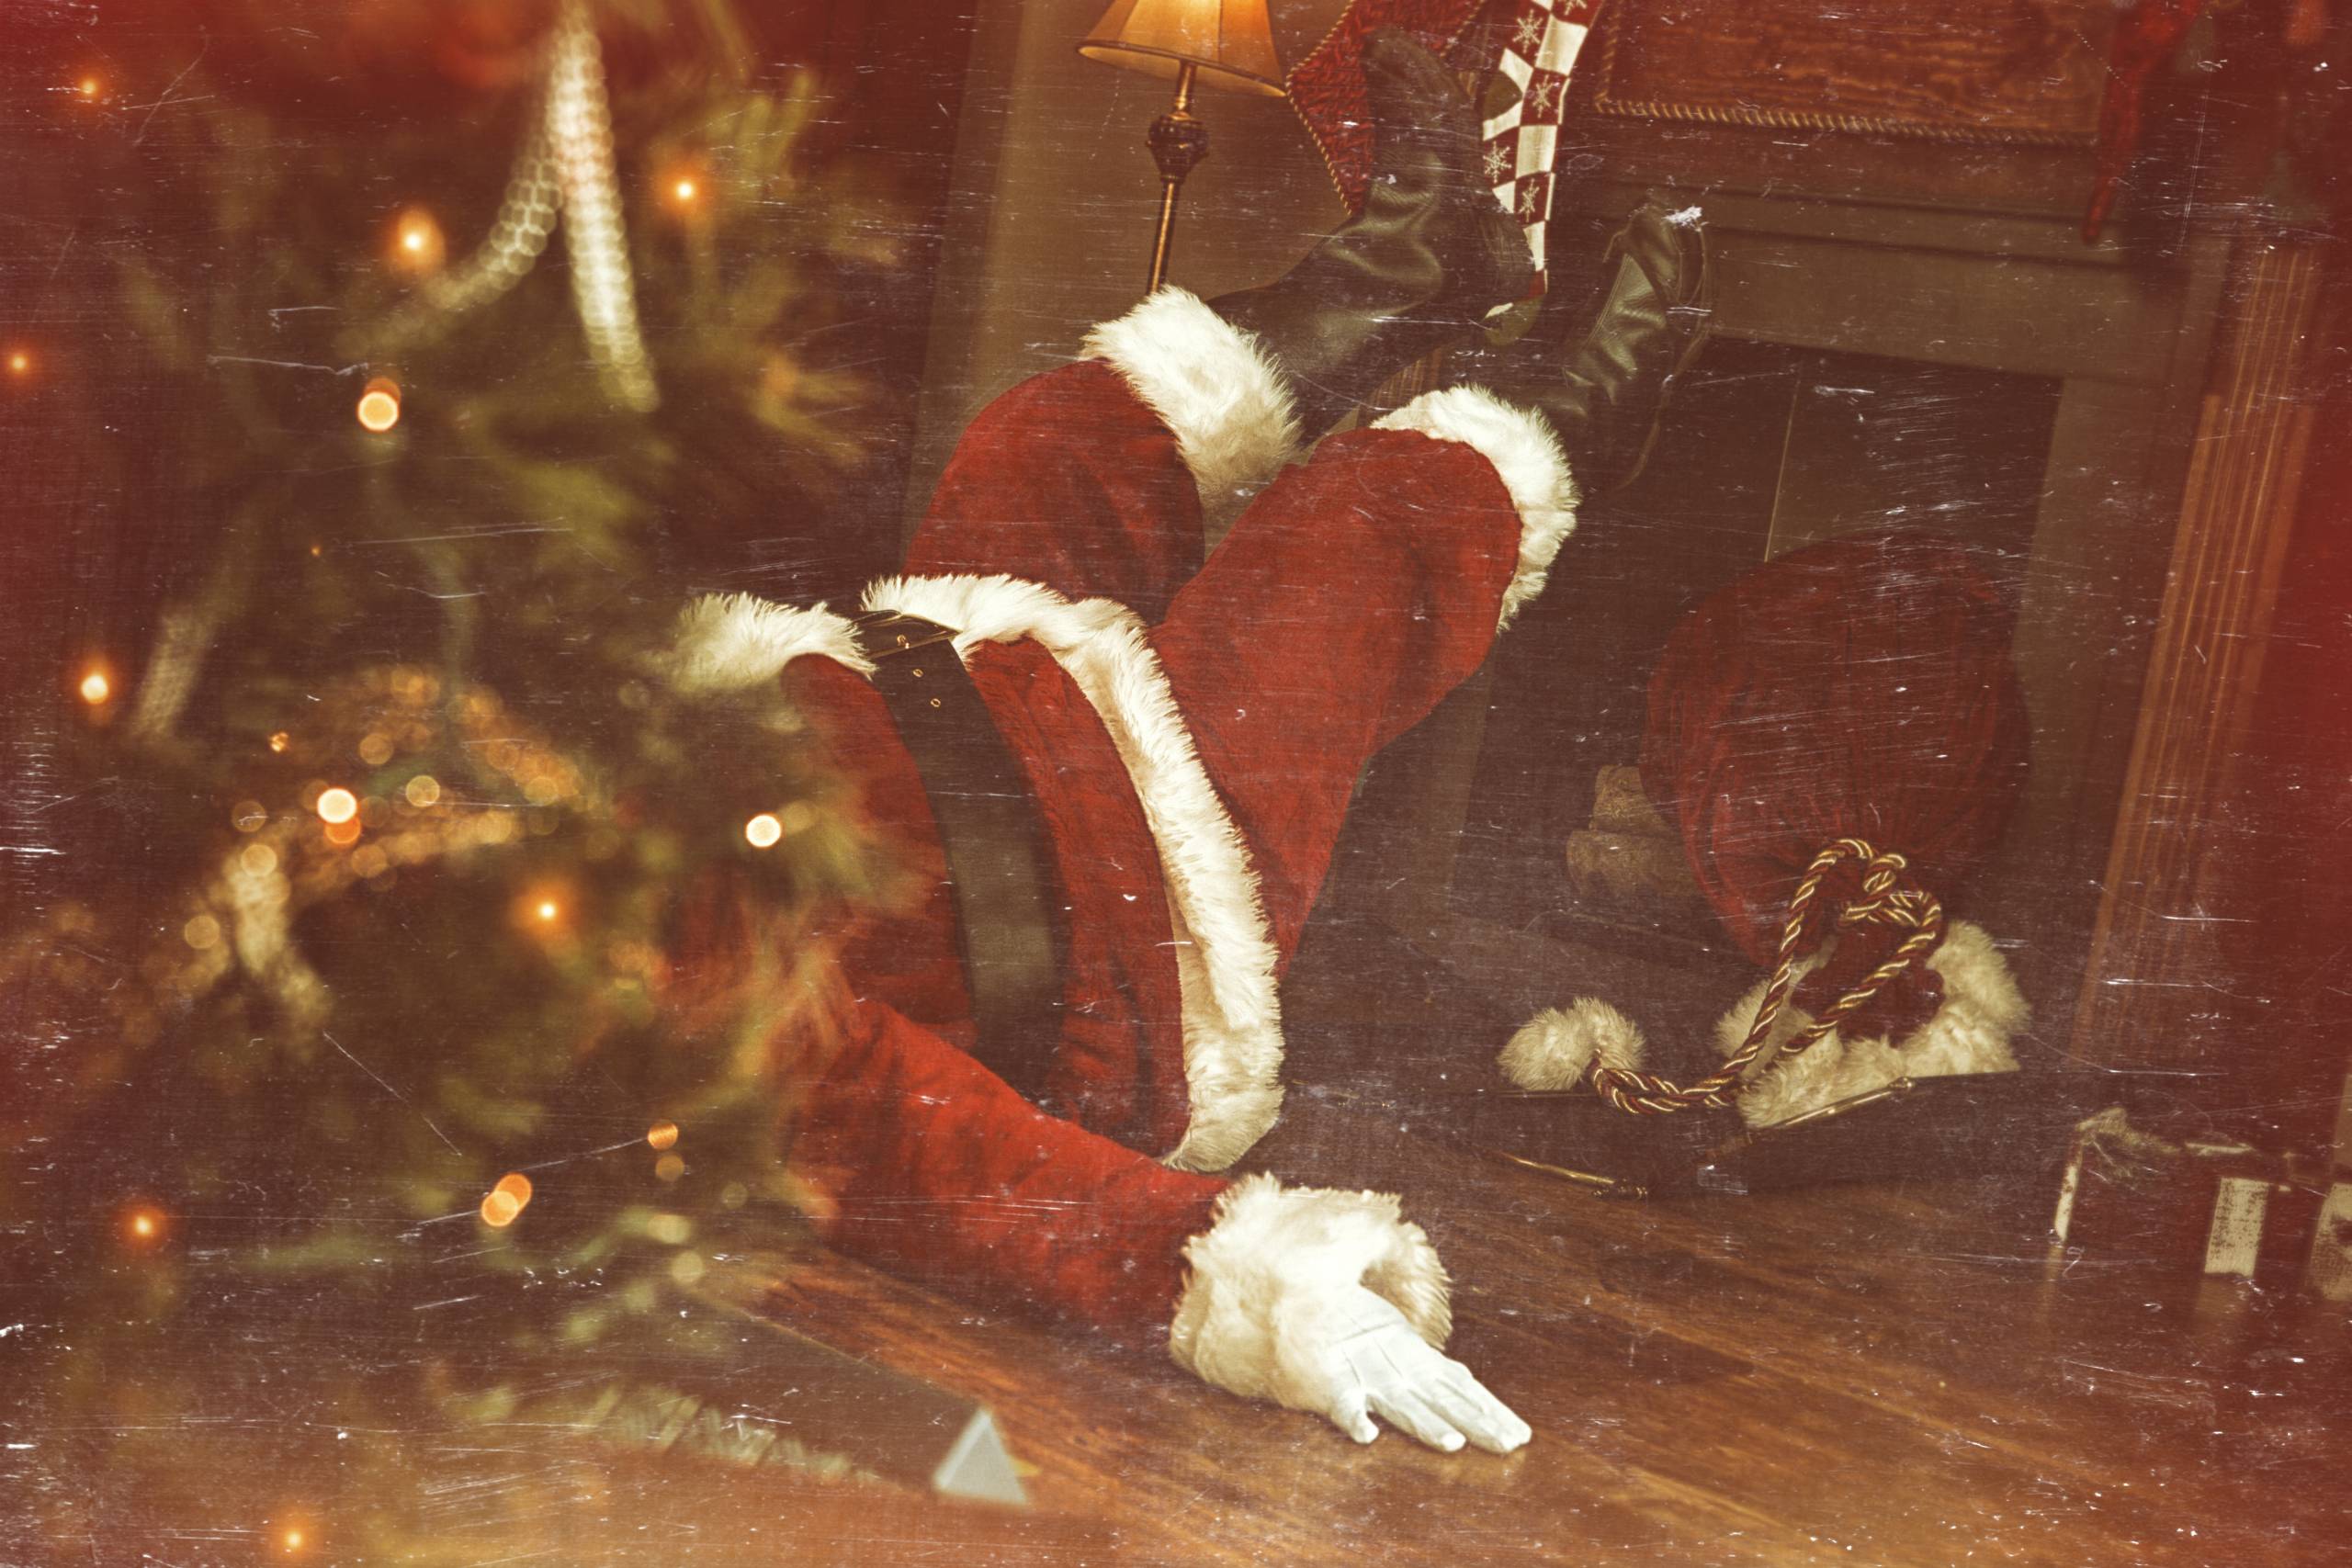 A Santa lying on the floor, arms spread wide, with his feet resting above a fireplace.